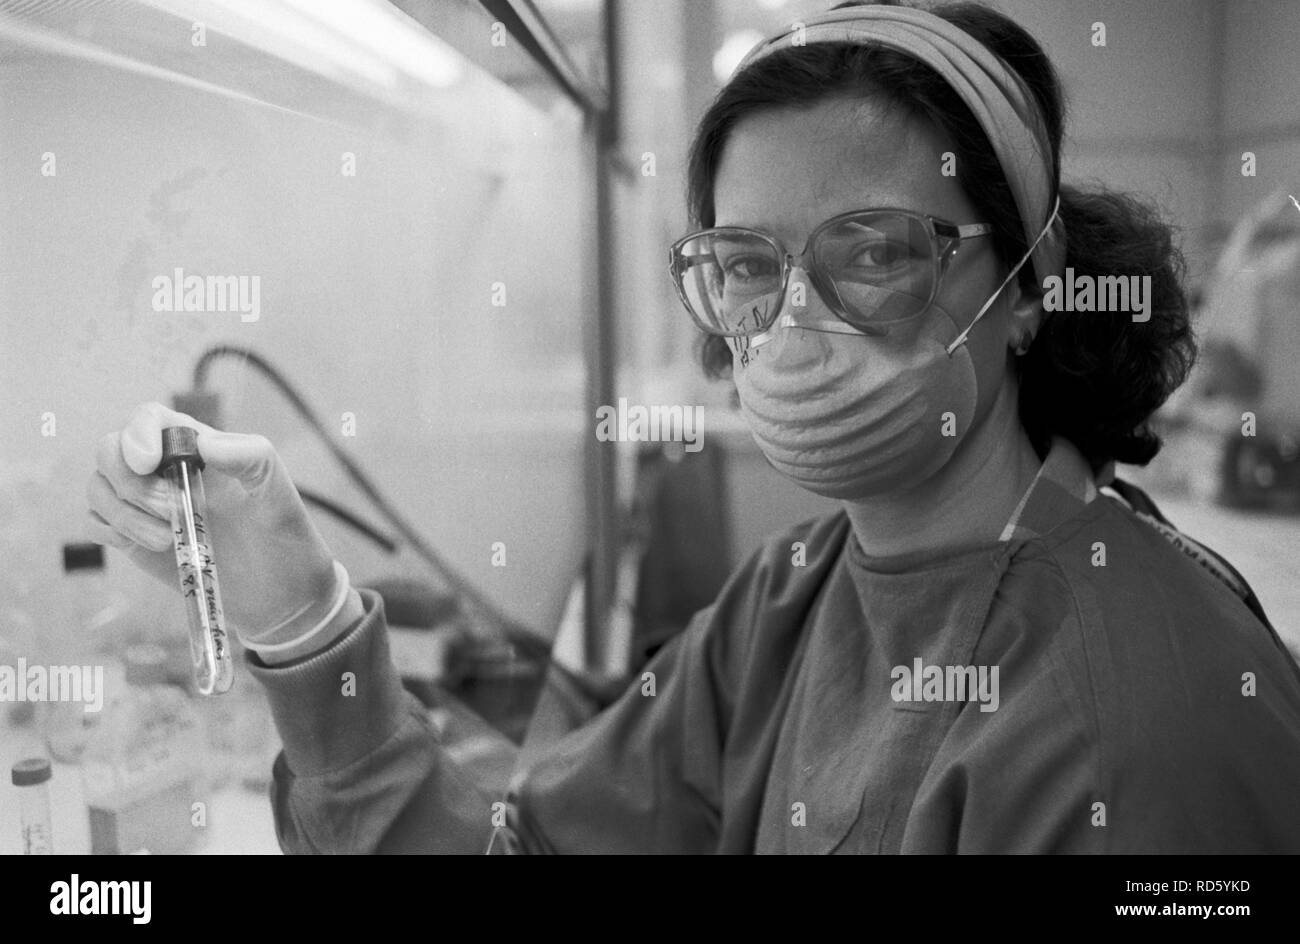 Pasteur Institute Institut Pasteur, Paris France 1980s. Dr Marie-Thérèse Nugeyre a member of Professor Montagniers team identifying the AIDS virus and finding a cure for HIV AIDS  Looking for the AIDS virus. Circa 1985 HOMER SYKES Stock Photo